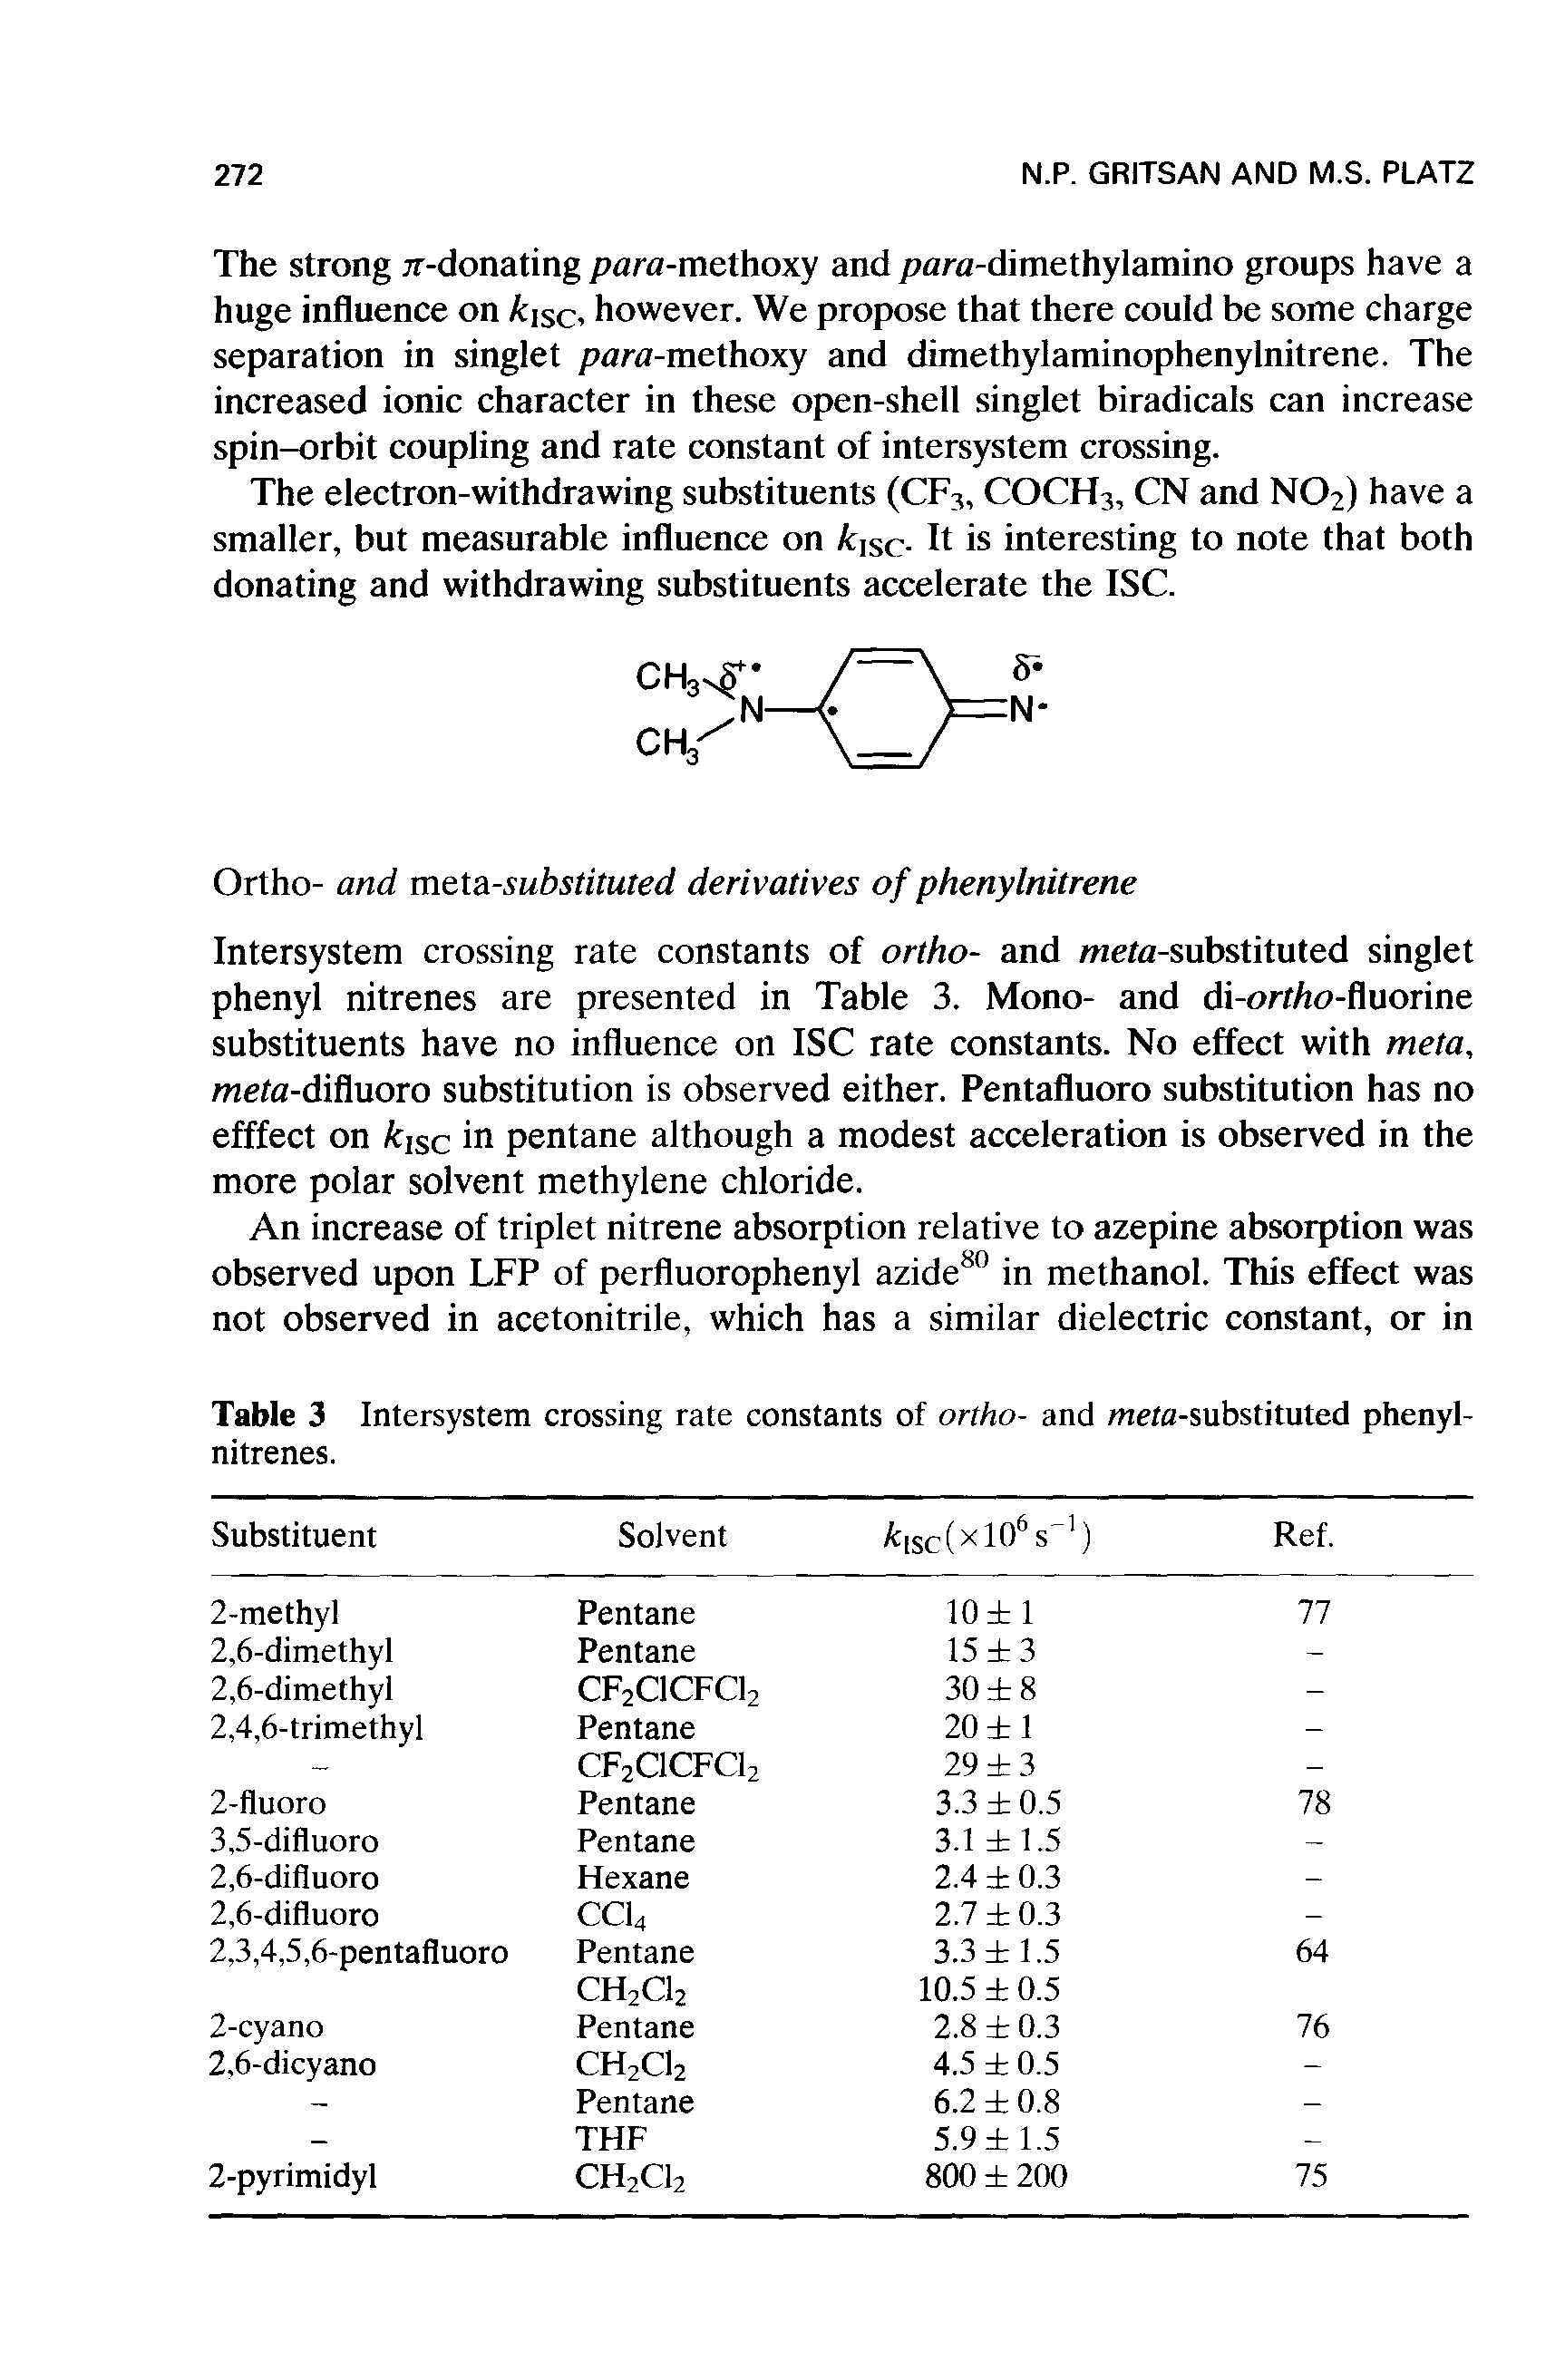 Table 3 Intersystem crossing rate constants of ortho- and meM-substituted phenyl-nitrenes.